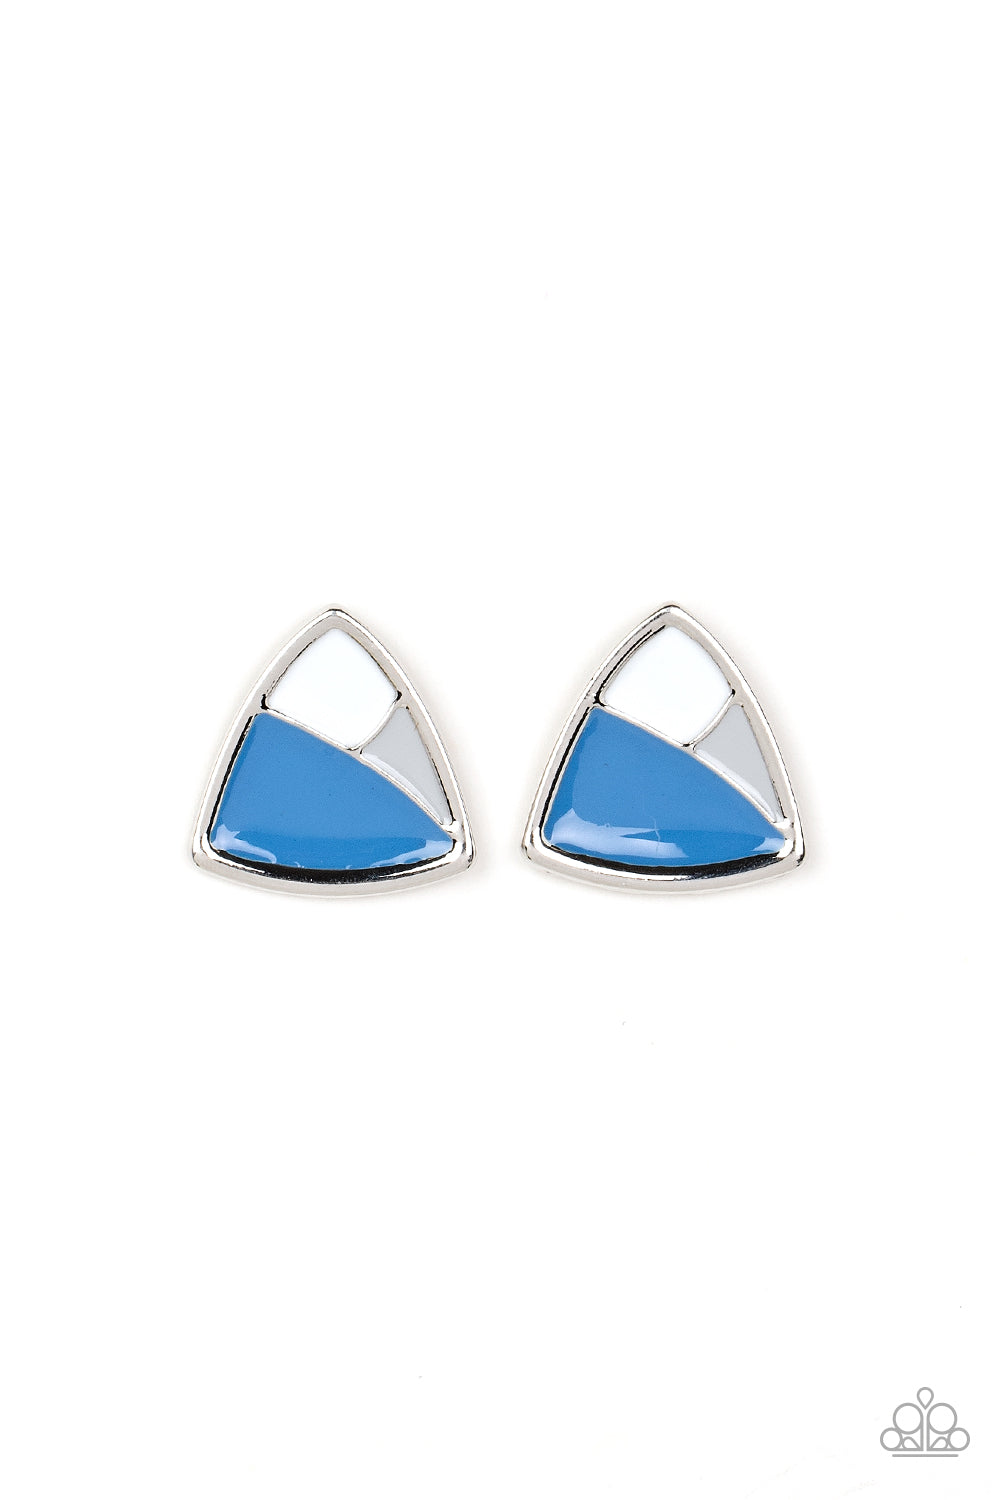 Kaleidoscopic Collision - Blue and Silver Earrings - Paparazzi Accessories - A collision of Skydiver, Northern Droplet, and white painted accents beam inside an asymmetric triangular frame for a contemporary pop of color.